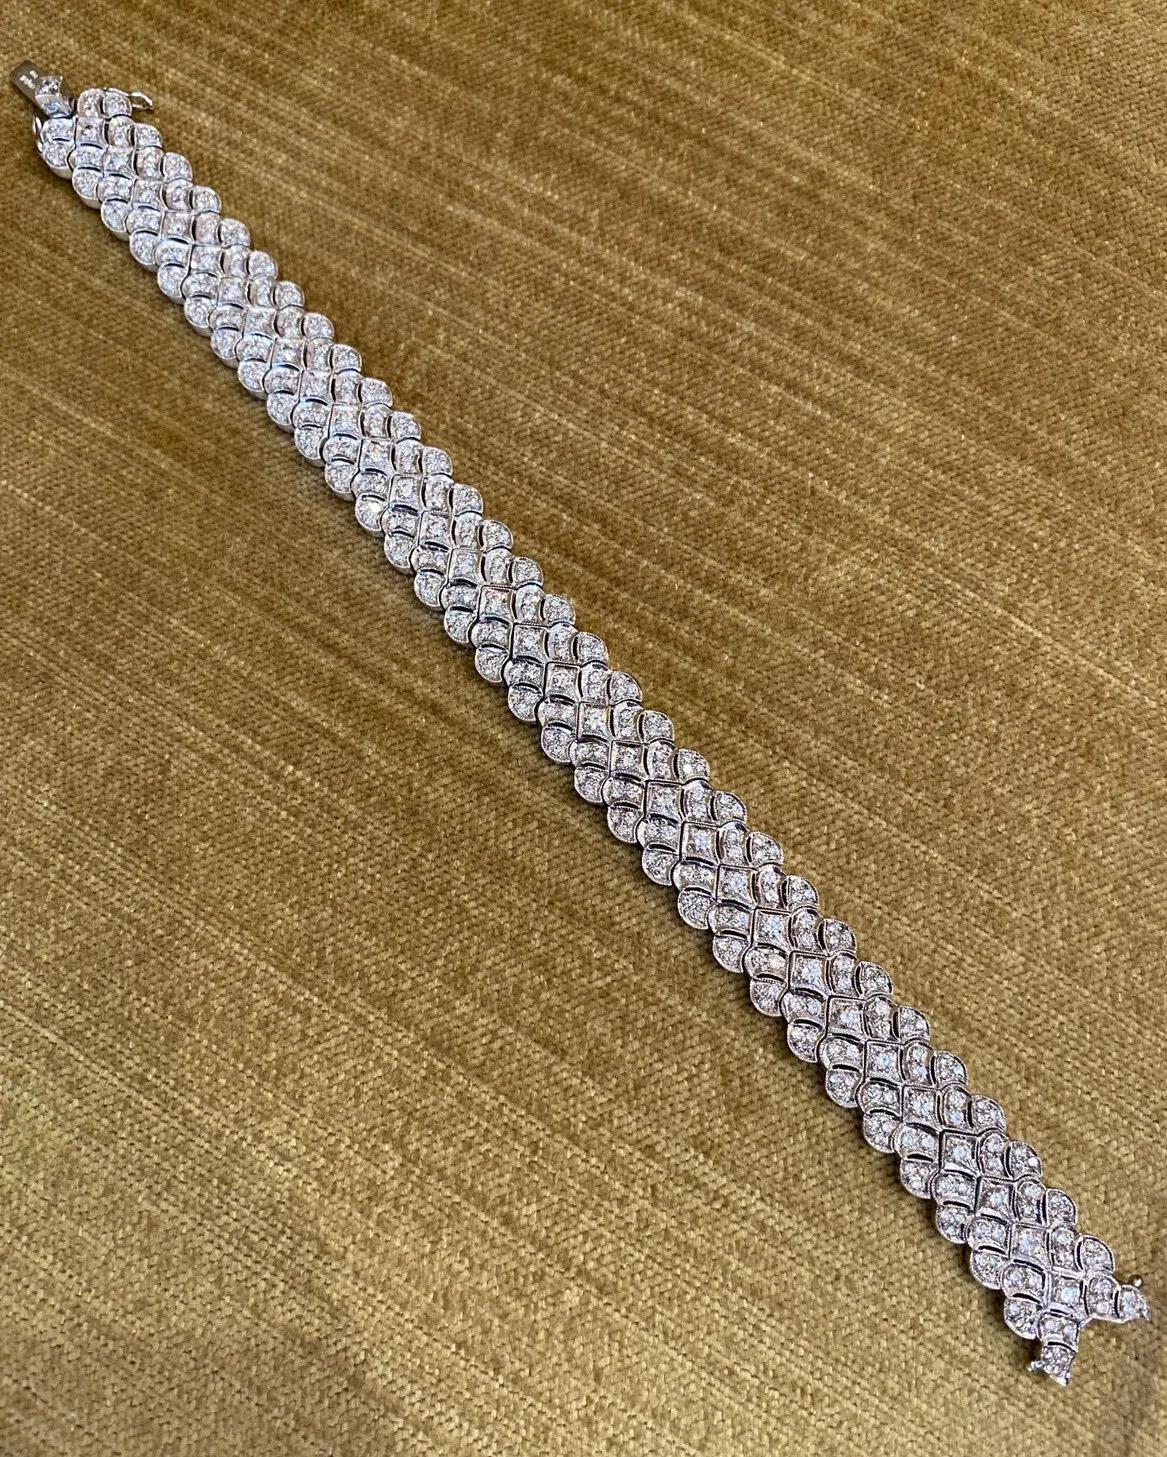 Vintage Scalloped Link Diamond Bracelet 4.50 Carat Total in 18k White Gold In Excellent Condition For Sale In La Jolla, CA